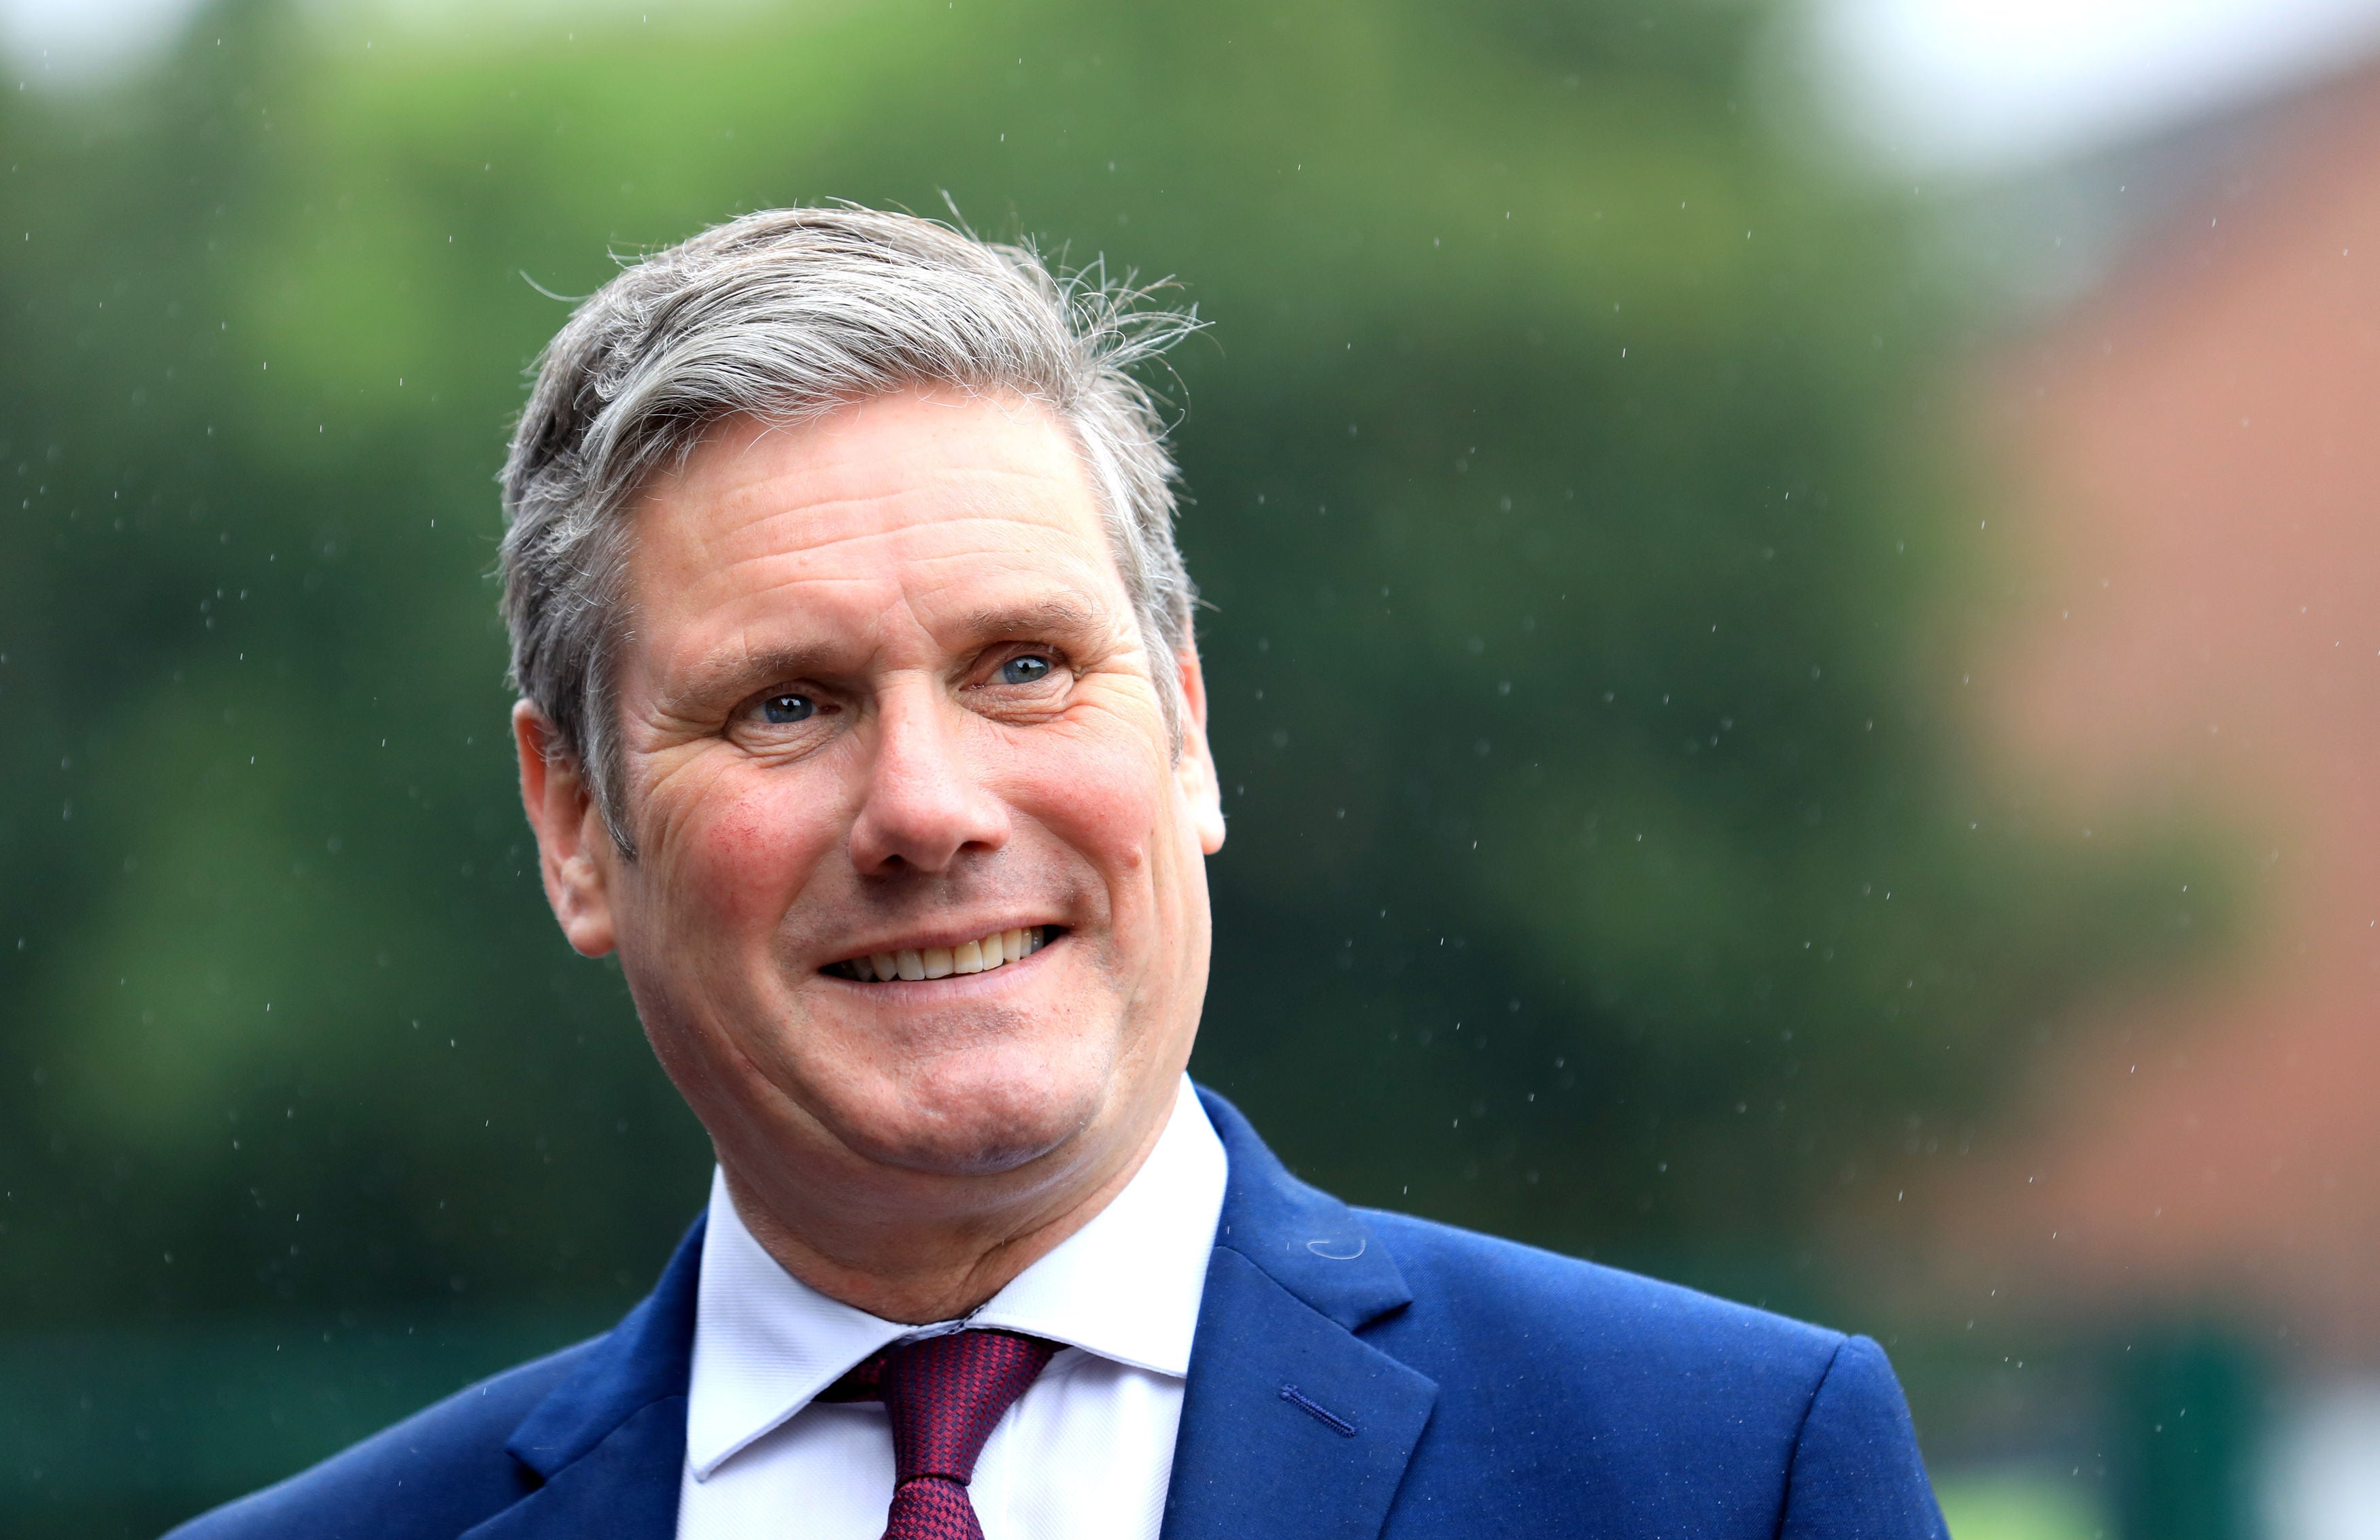 ‘The worst smear the right-wing press can come up with is that Keir Starmer has been knighted for his outstanding public service as director of public prosecutions’